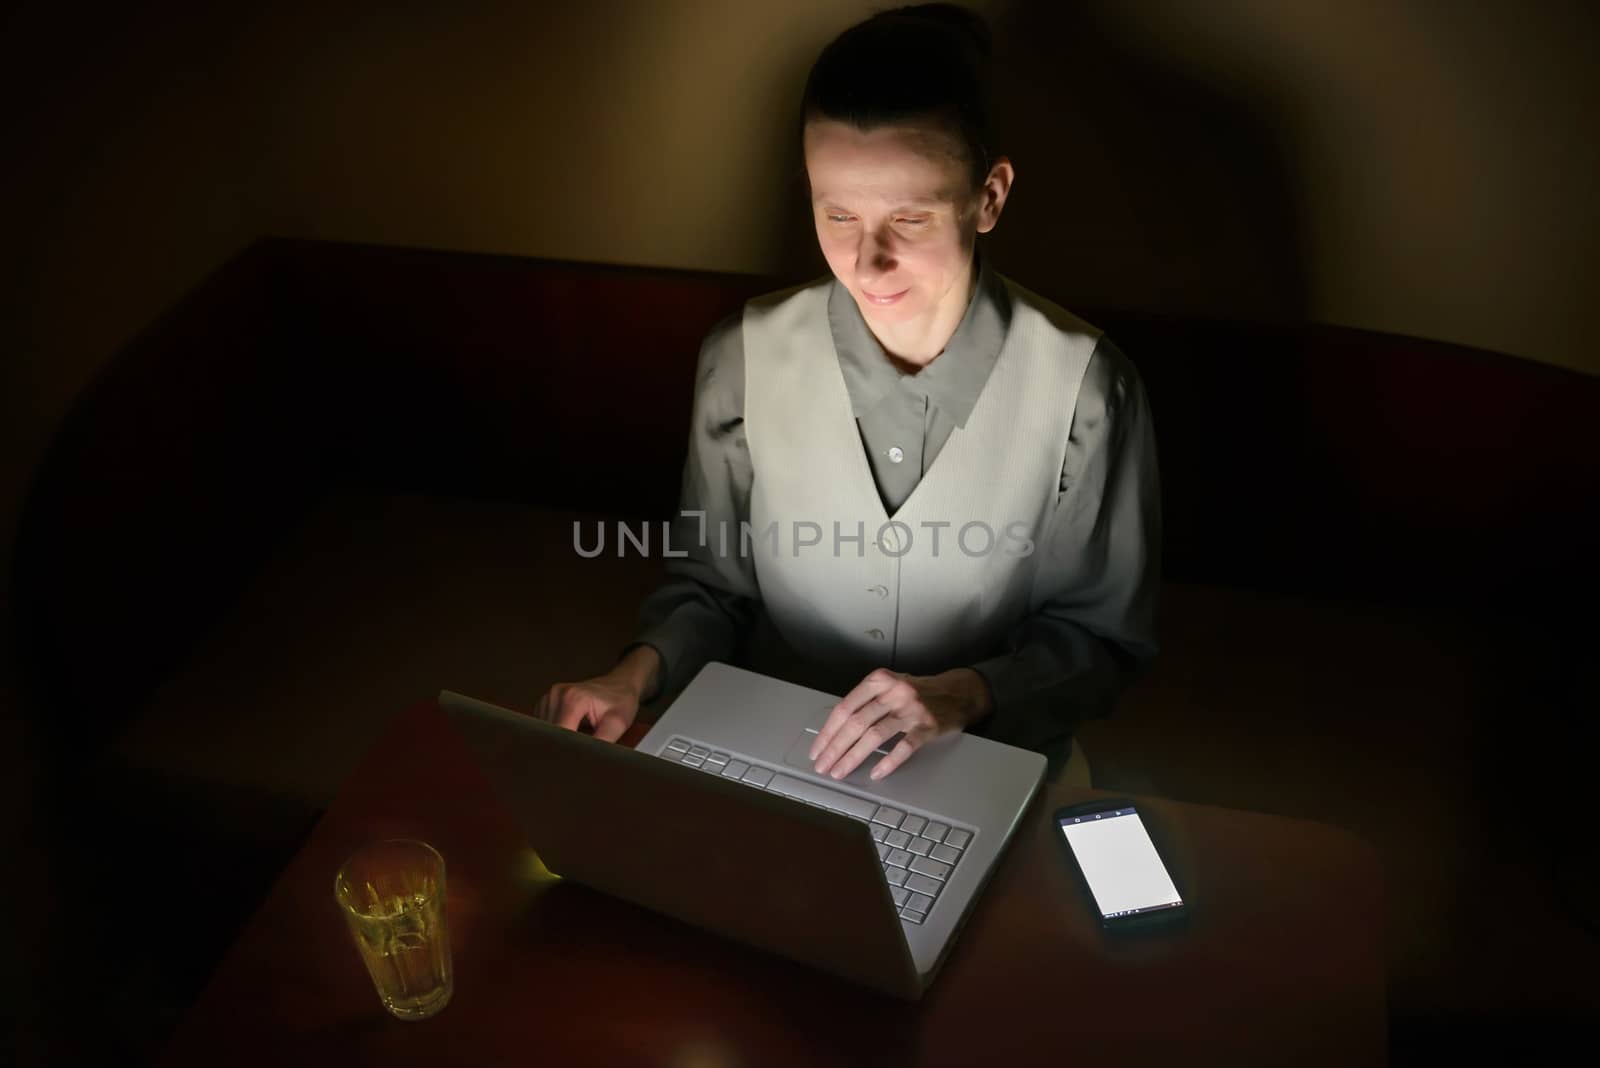 A business woman is using a computer in a dark room. Her face is illuminated by the light from the lcd monitor.